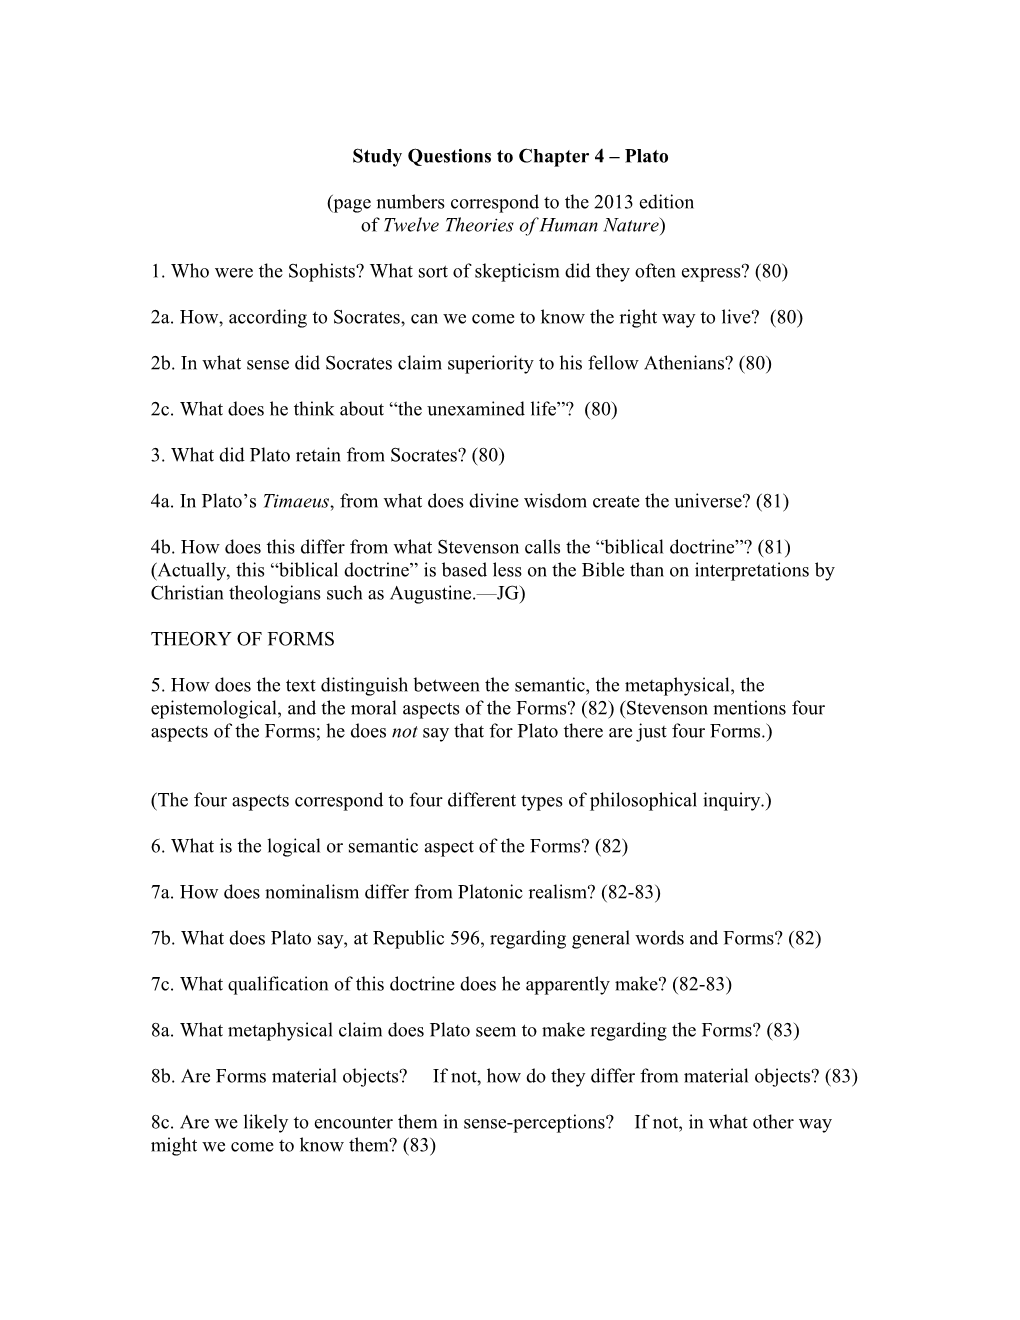 Study Questions to Chapter 1 Confucianism